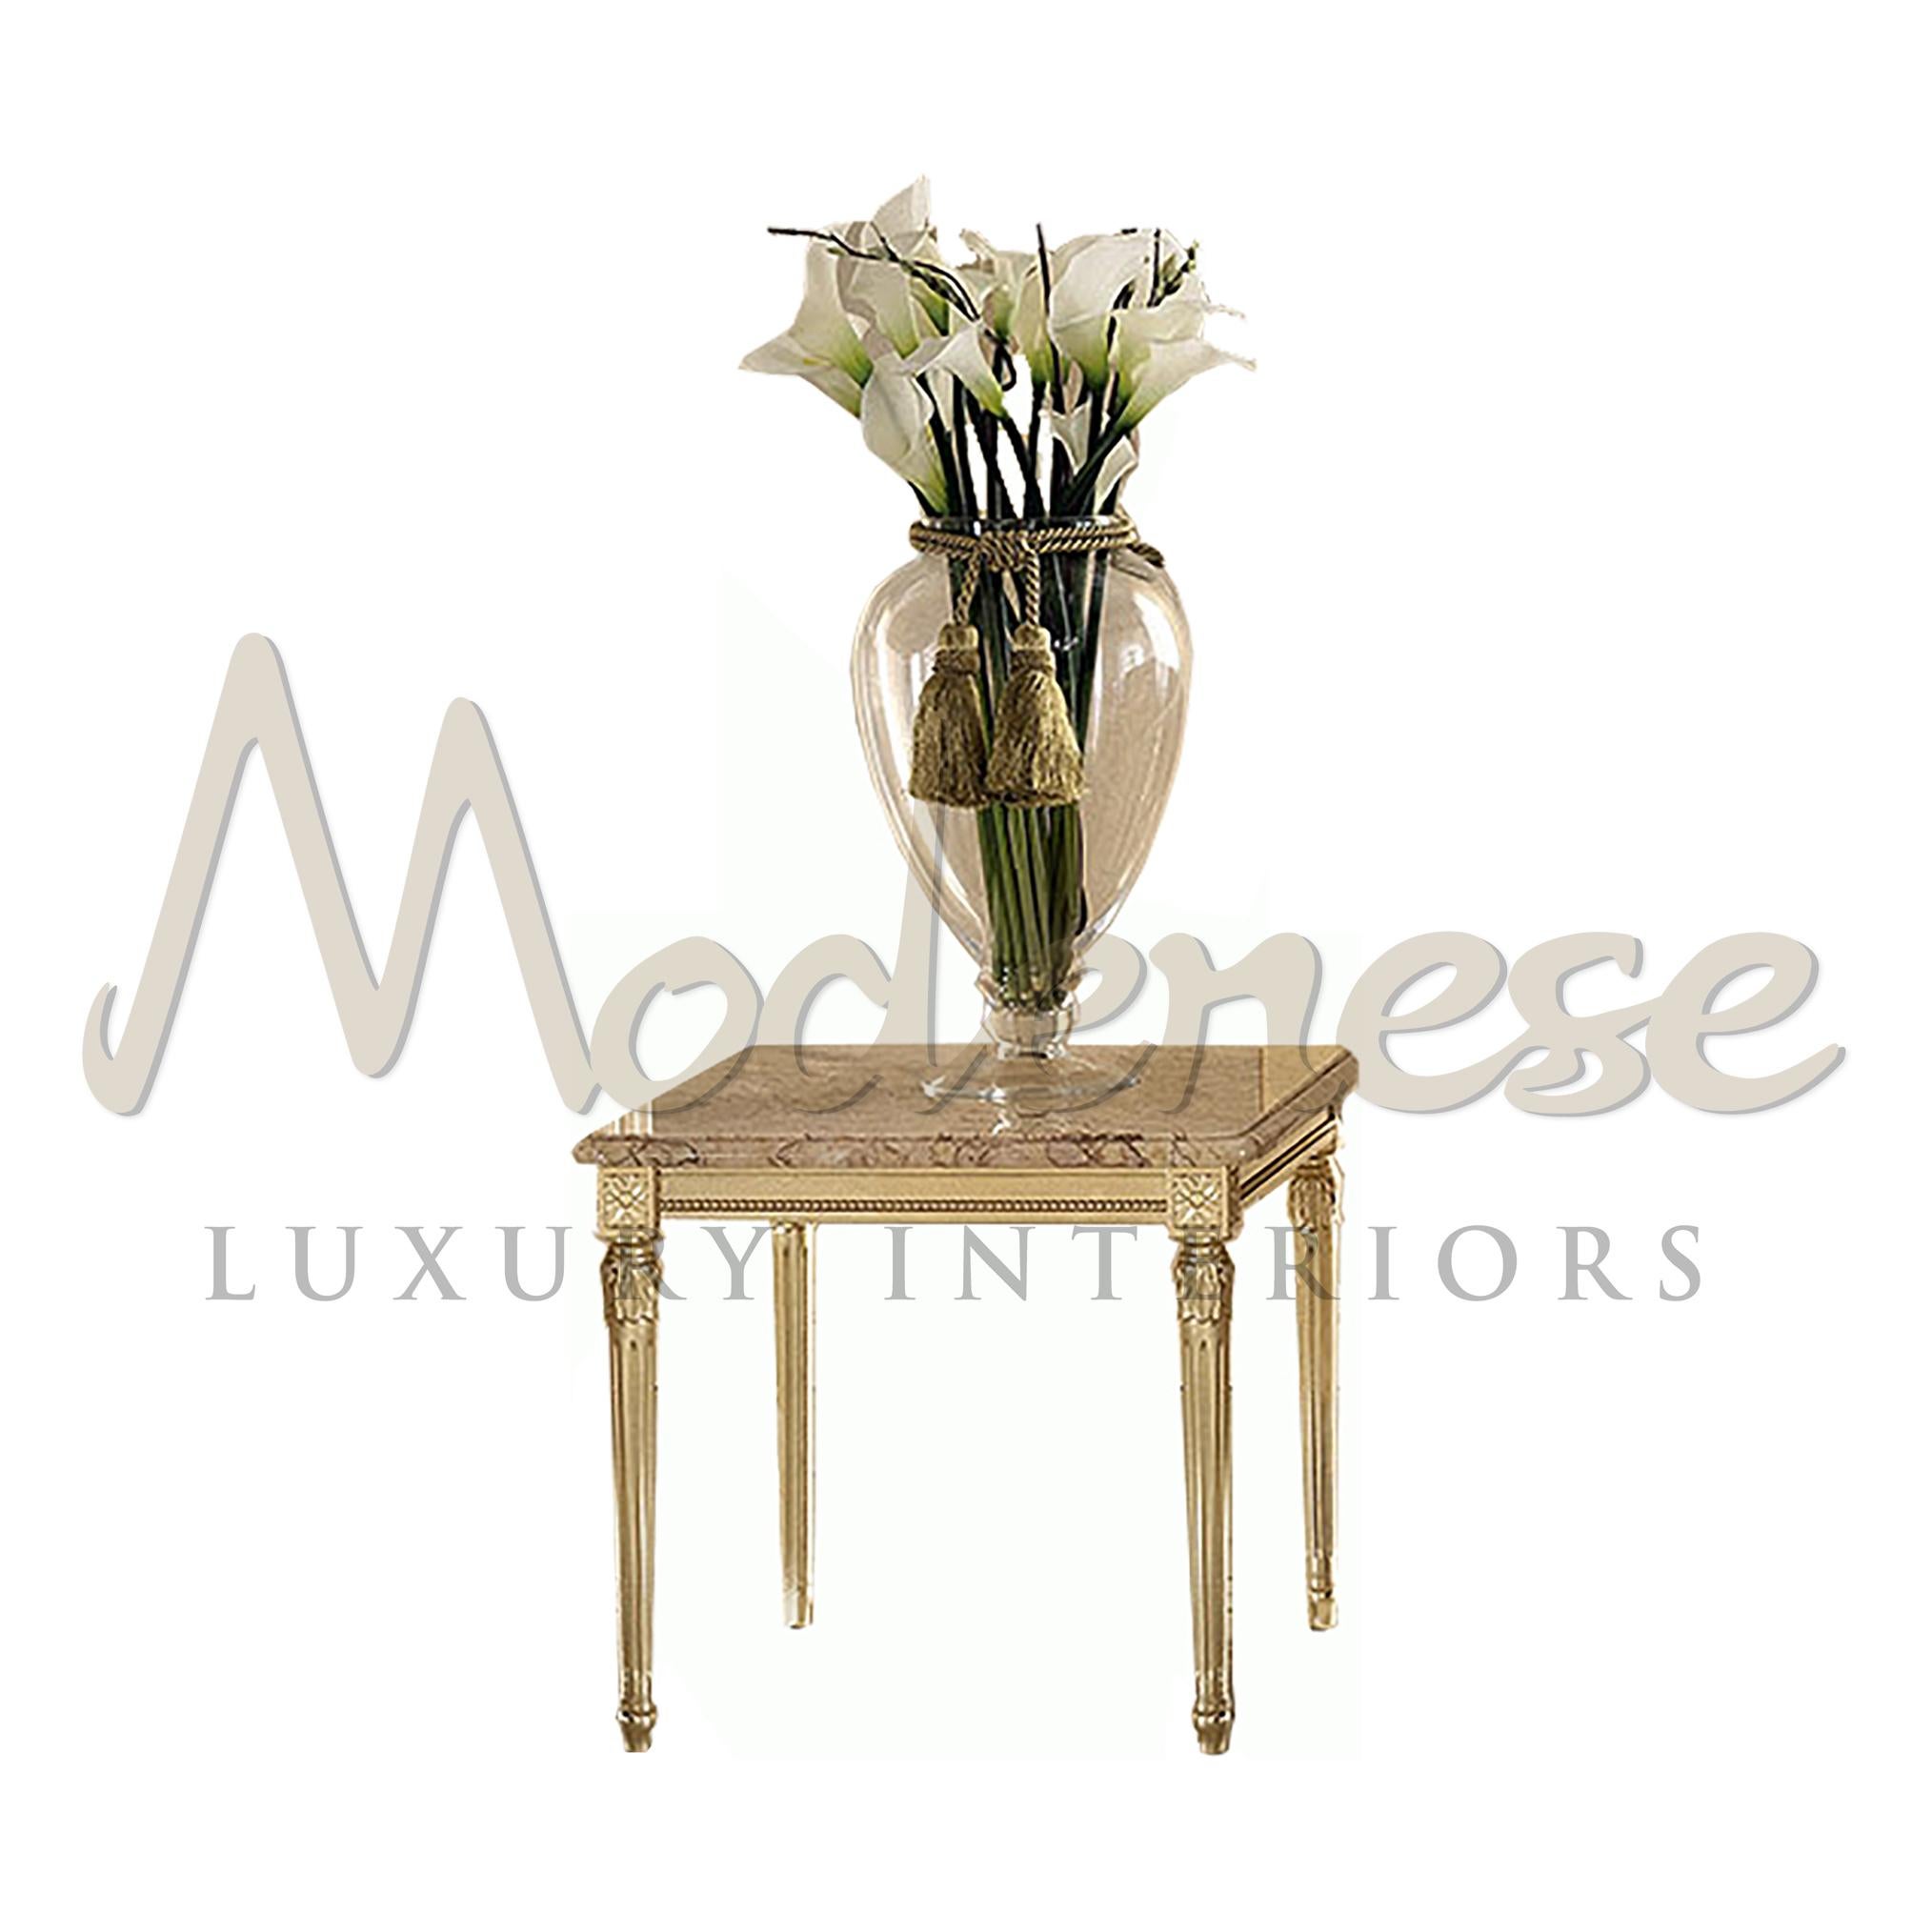 Bespoke square Honey Onyx marble side table. Its elegant and linear empire-style legs make this piece an unique piece of luxury furniture to keep your sofas company in your spacious living room. Goes adorably with cream-colored sofas and chairs by